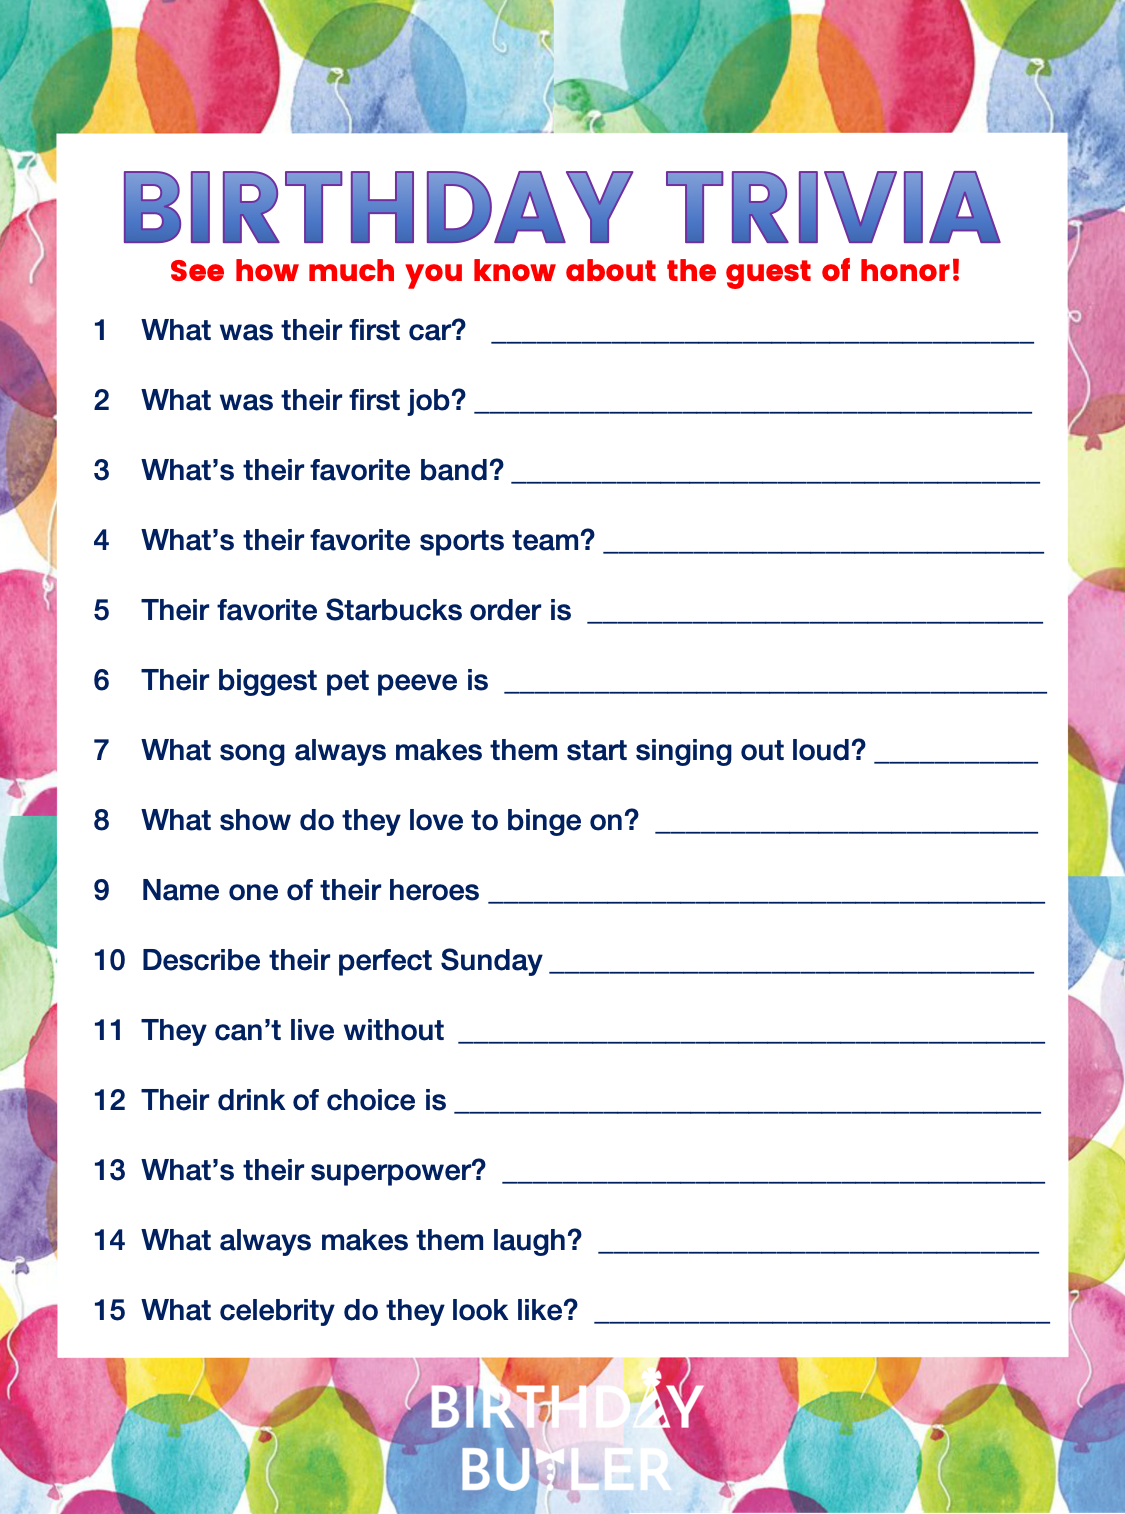 ADD OOMPH TO YOUR PARTY WITH BIRTHDAY TRIVIA Birthday Butler